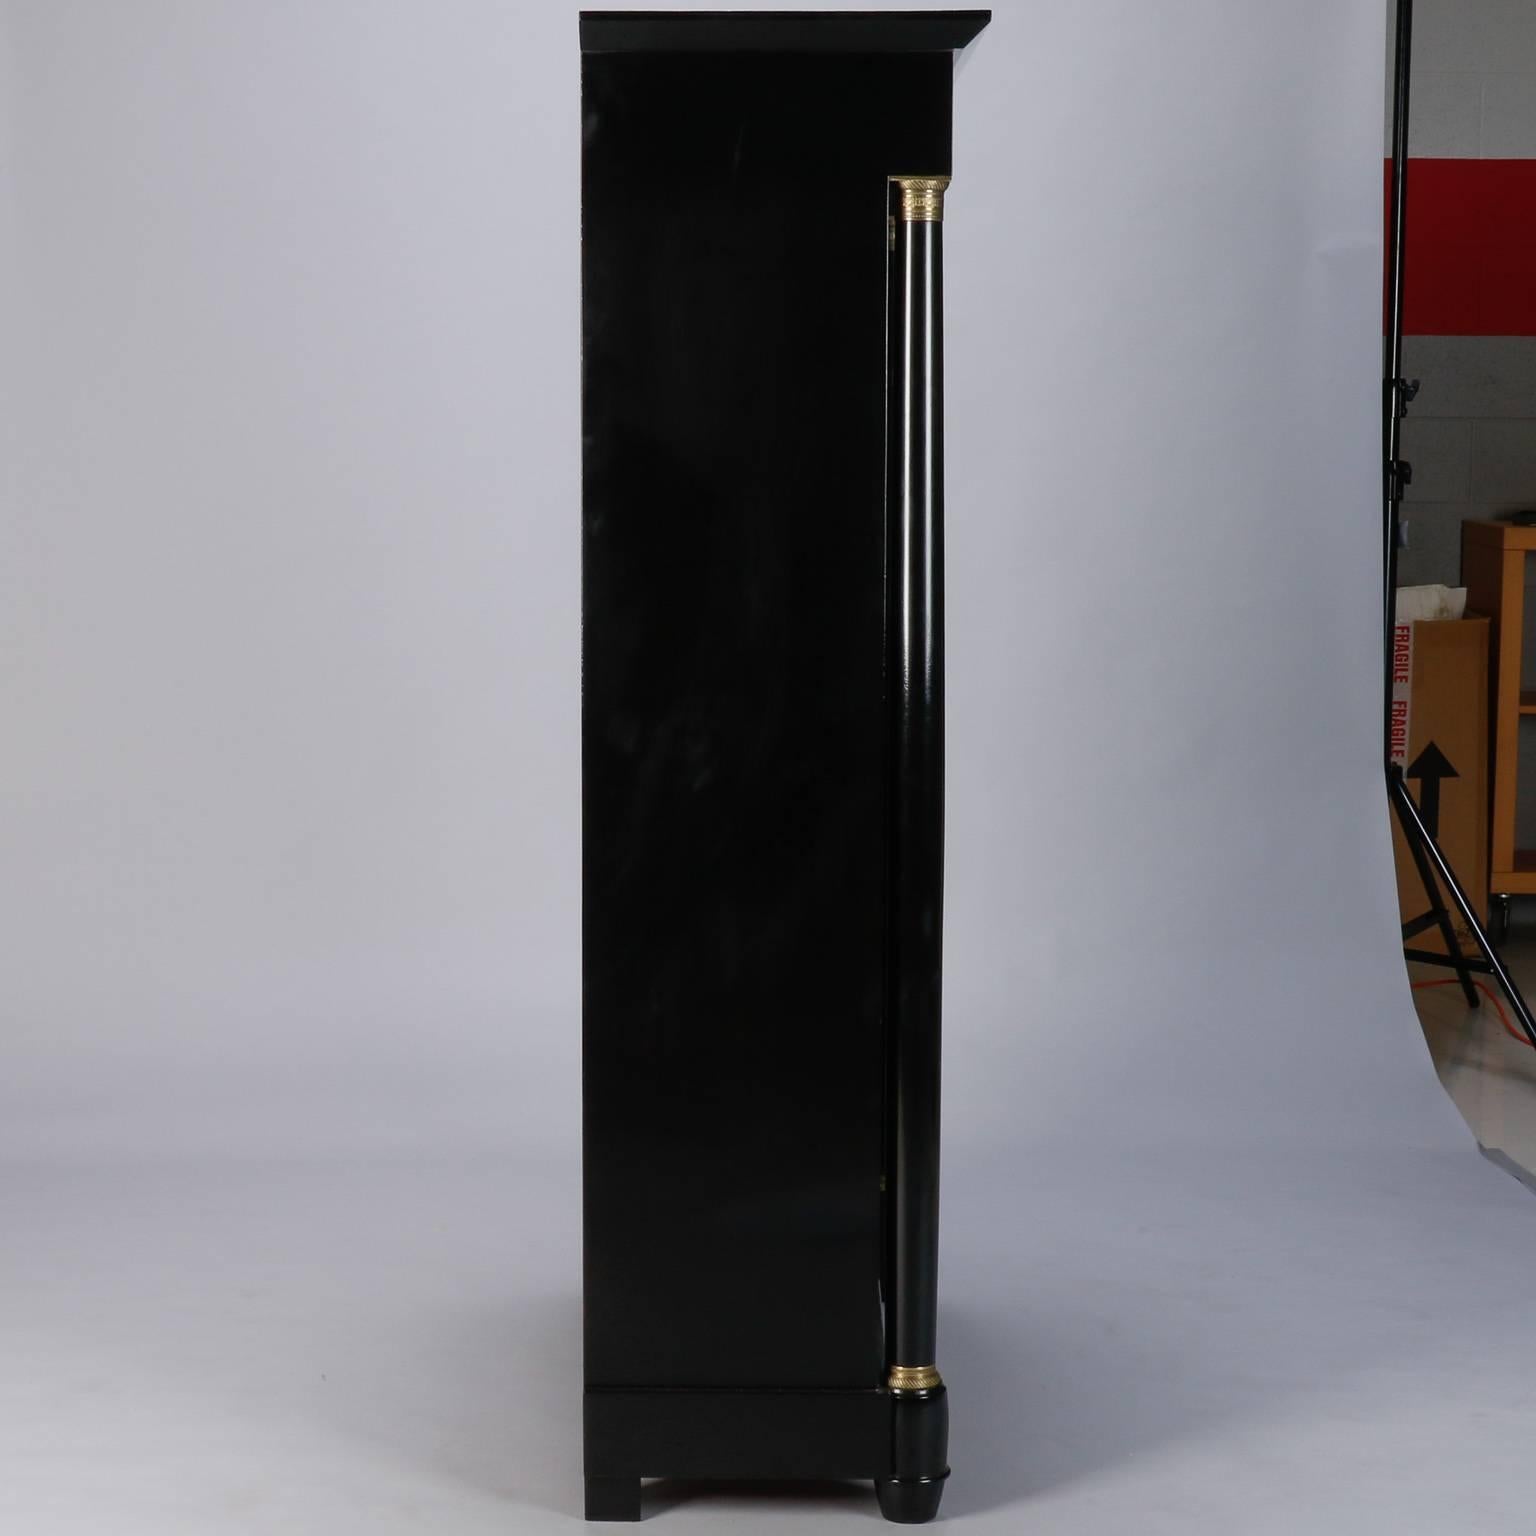 Found in England, this circa 1940s tall open front bookcase is in Classic Empire form with newly ebonized finish and decorative brass mounts. Shelves are 12.5” deep.

.